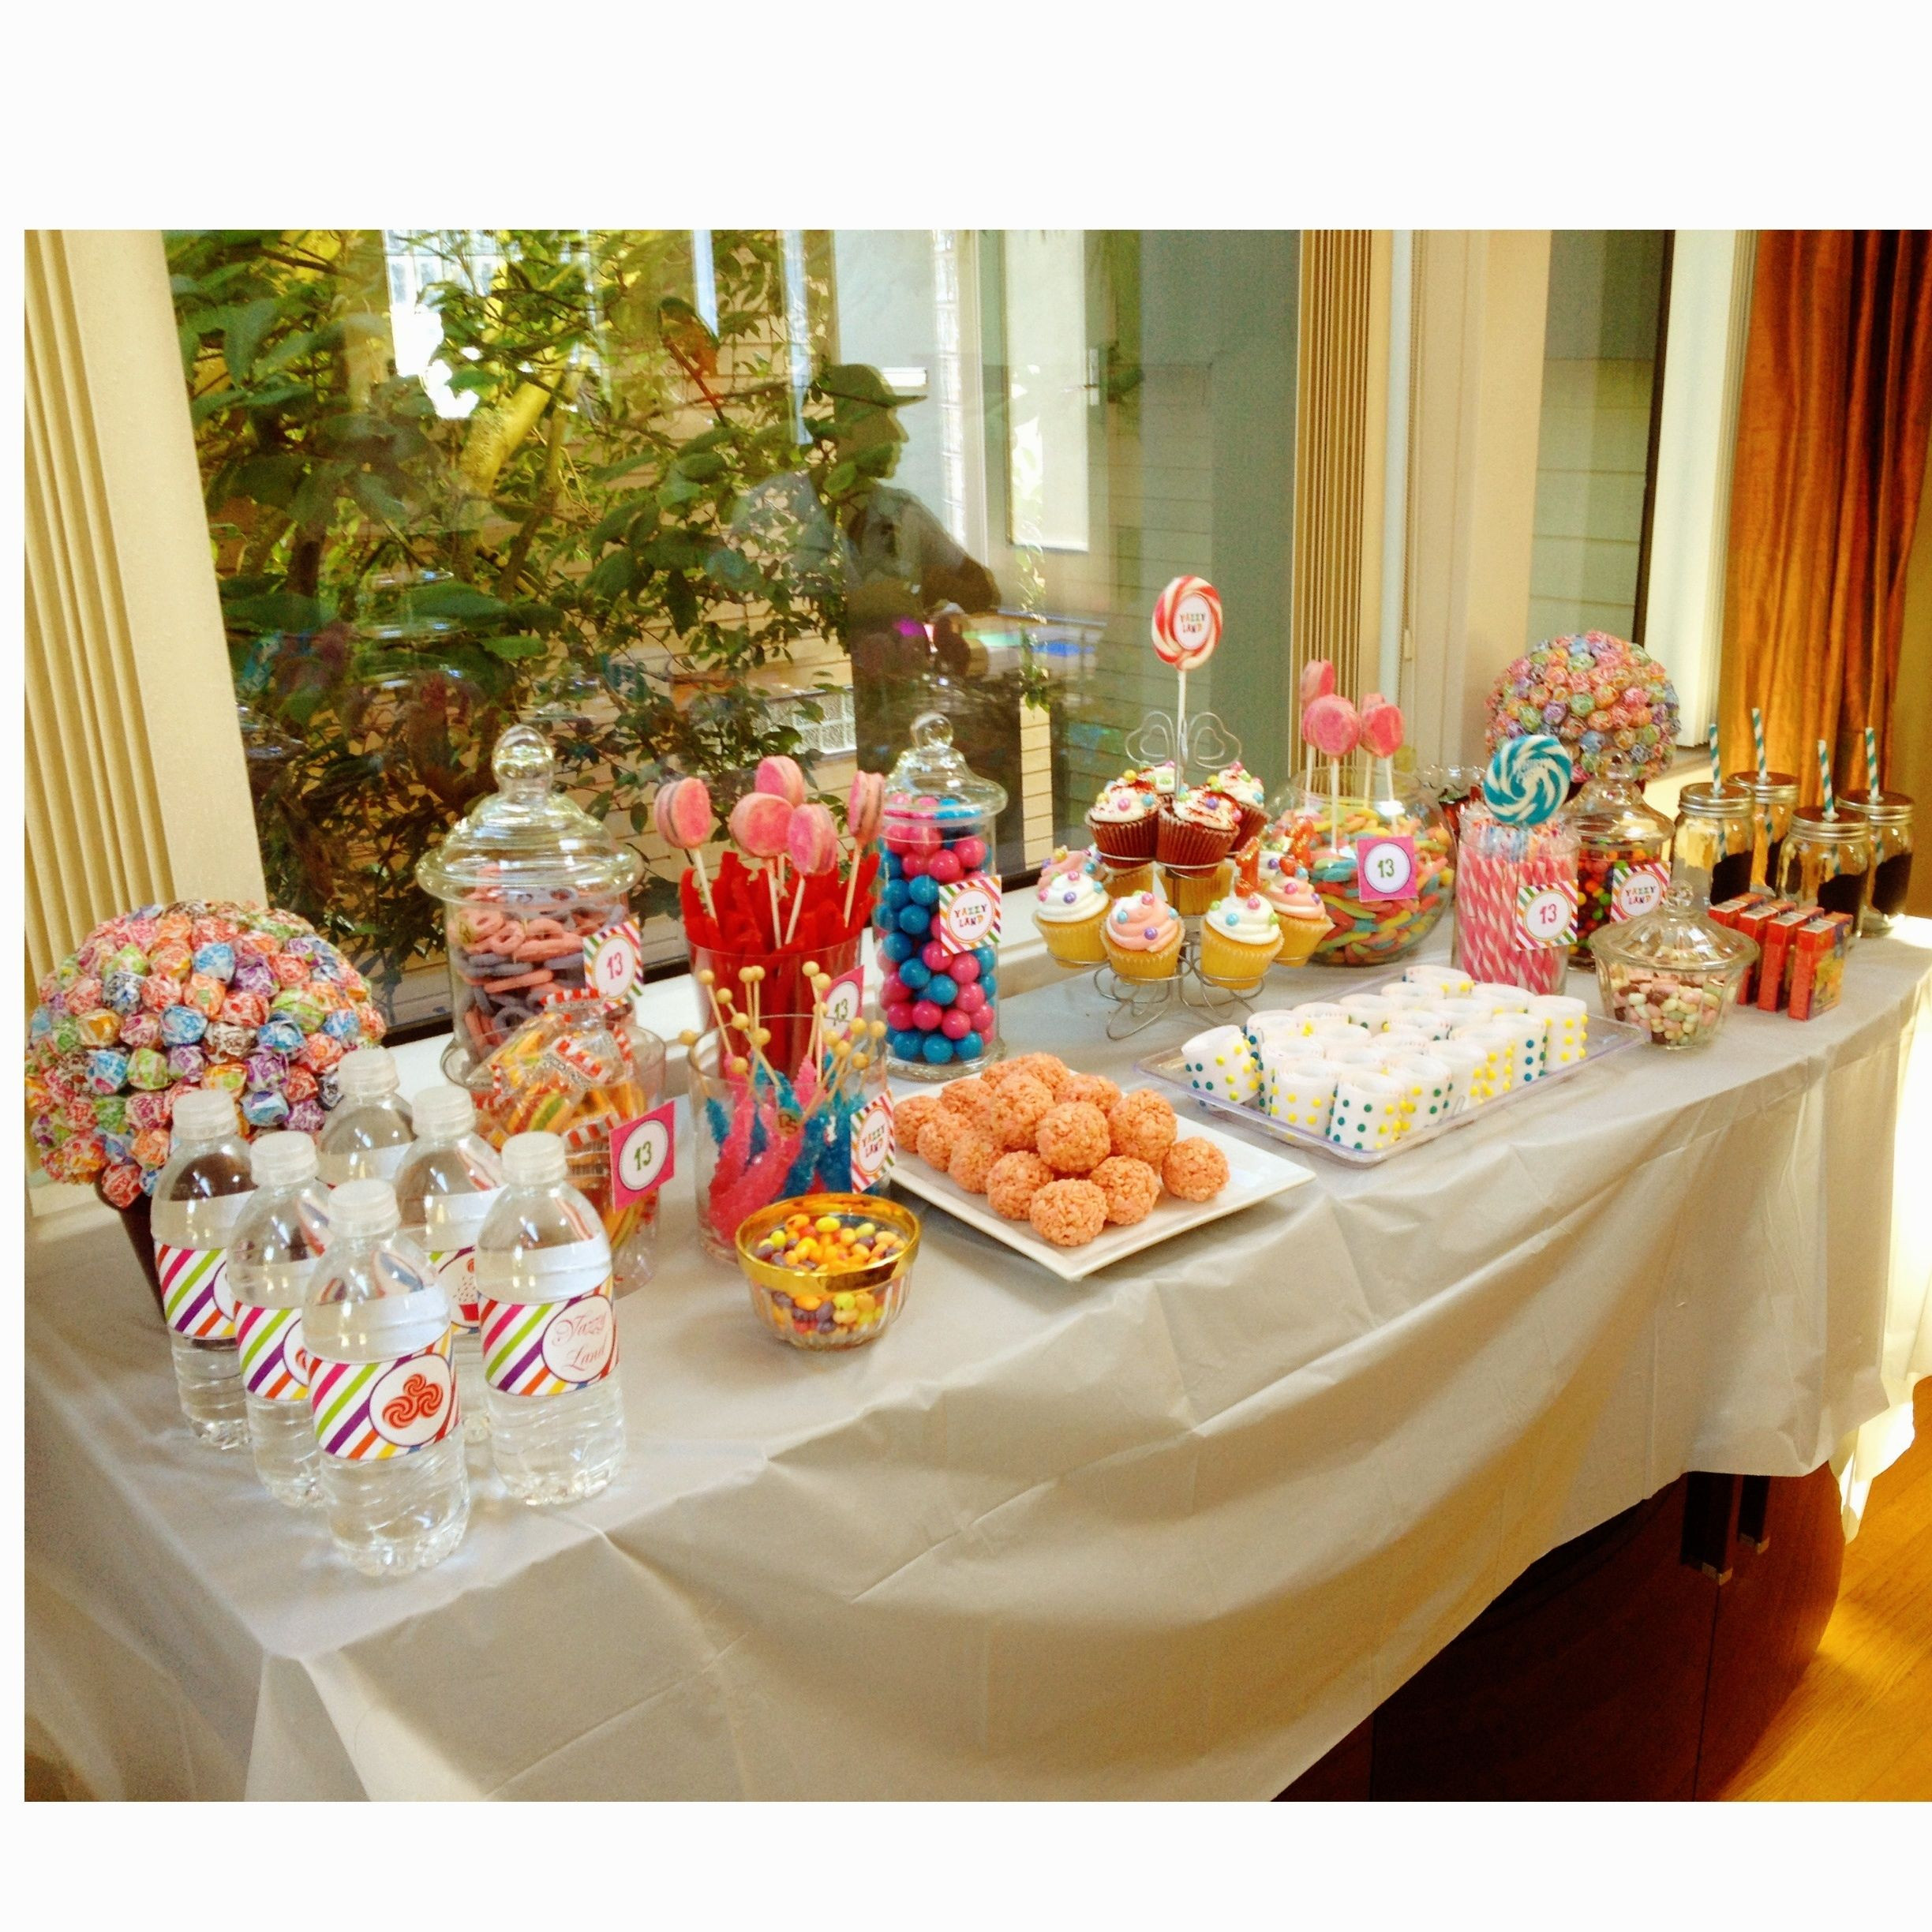 Sweet 16 Party Food Ideas
 Candy Buffet ideas for Desiree s Sweet Sixteen use